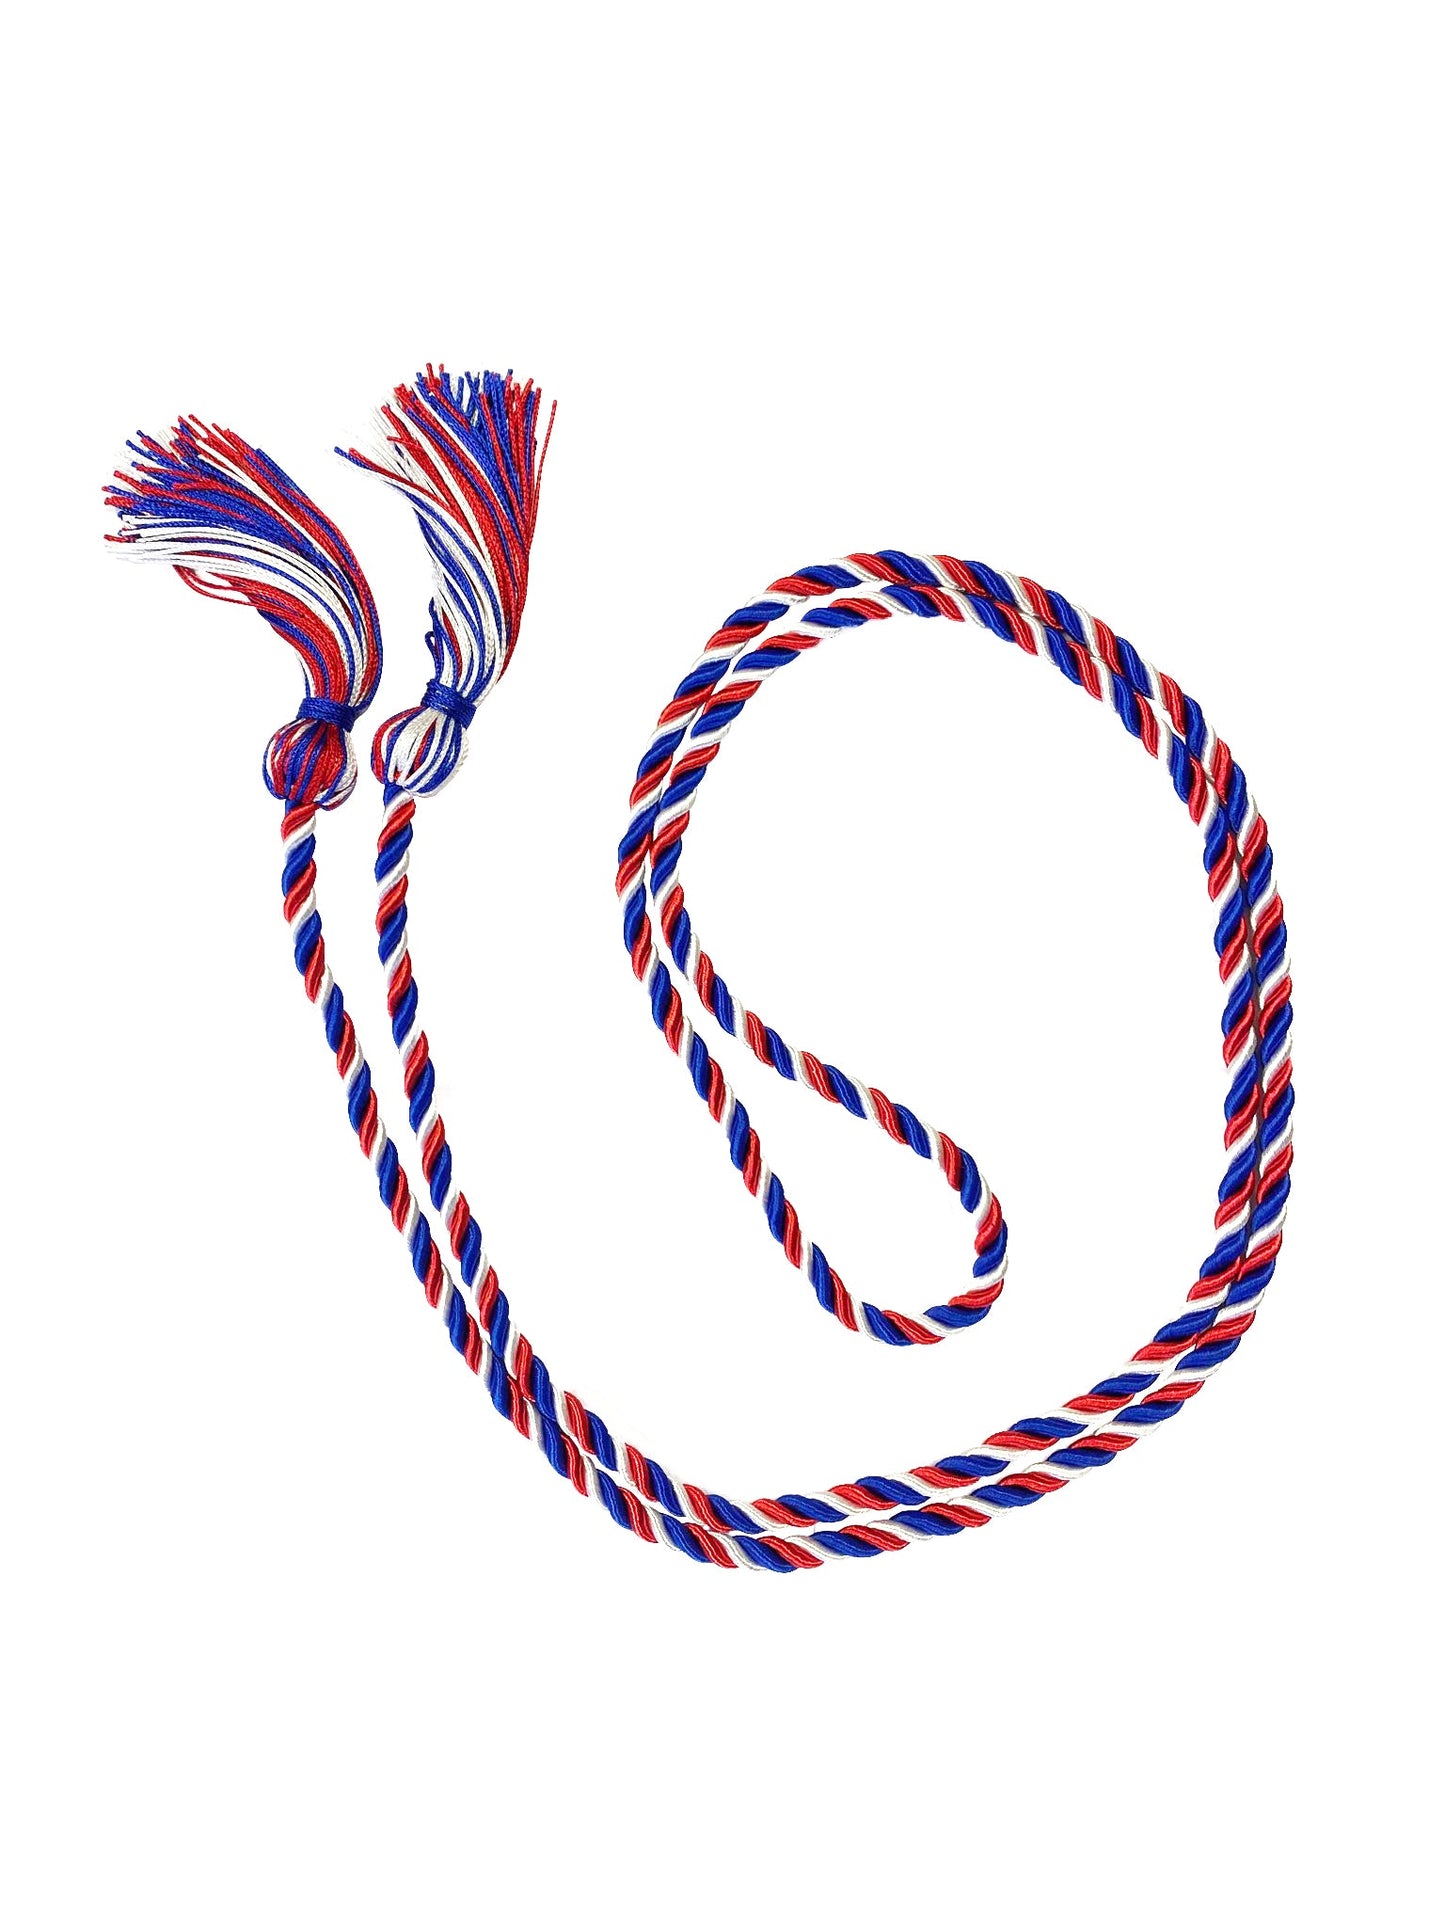 Military Graduation Honor Cord - Red, White & Blue Honor Cords